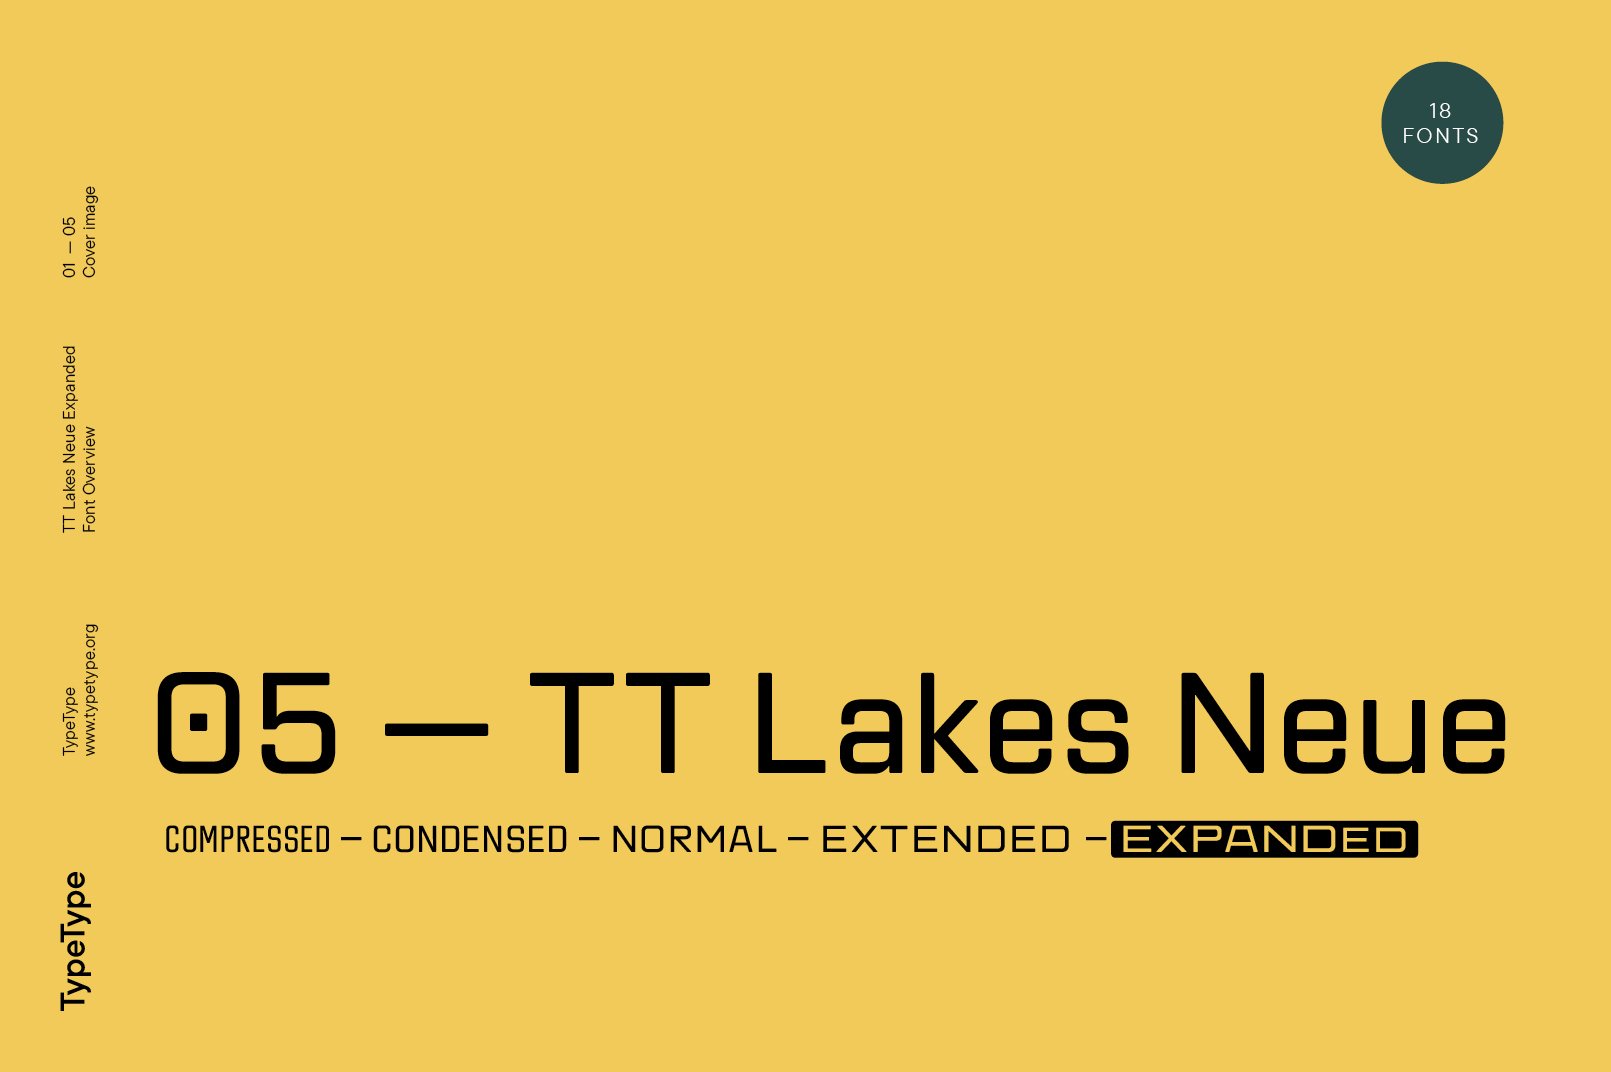 TT Lakes Neue Expanded: 60% off! cover image.